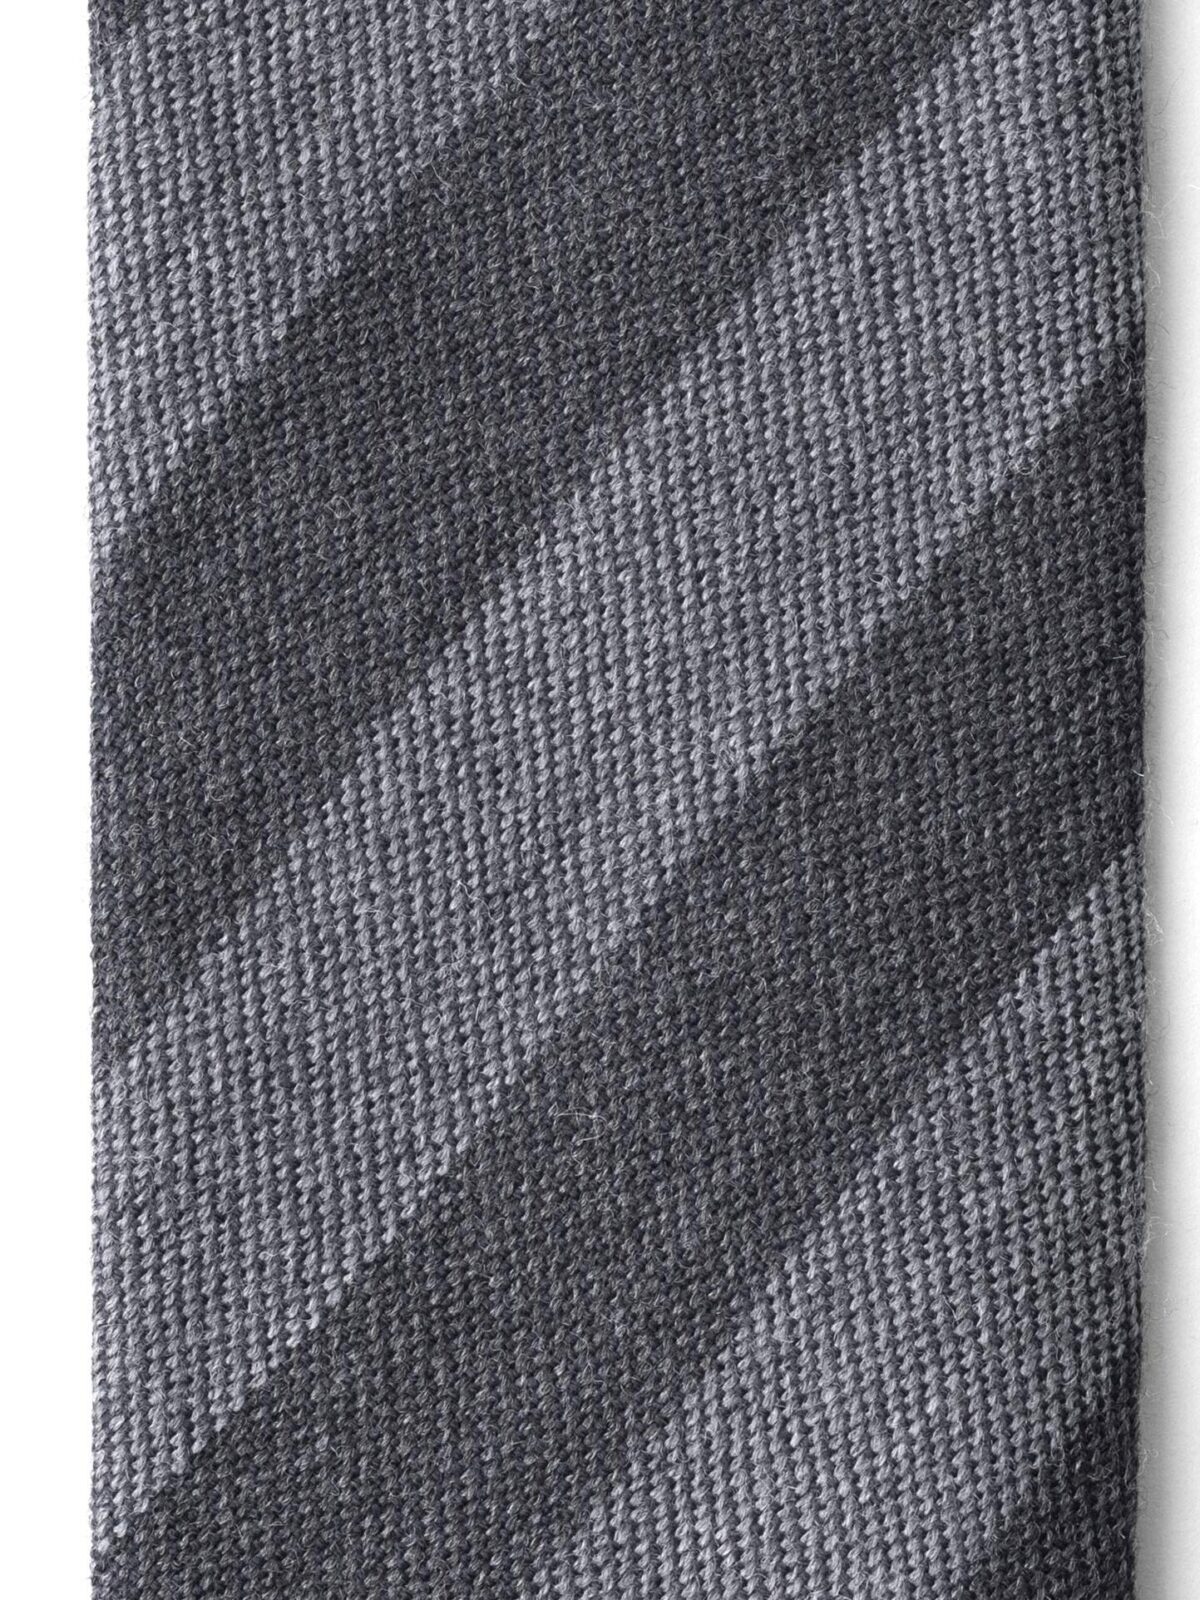 Grey and Charcoal Striped Wool Tie